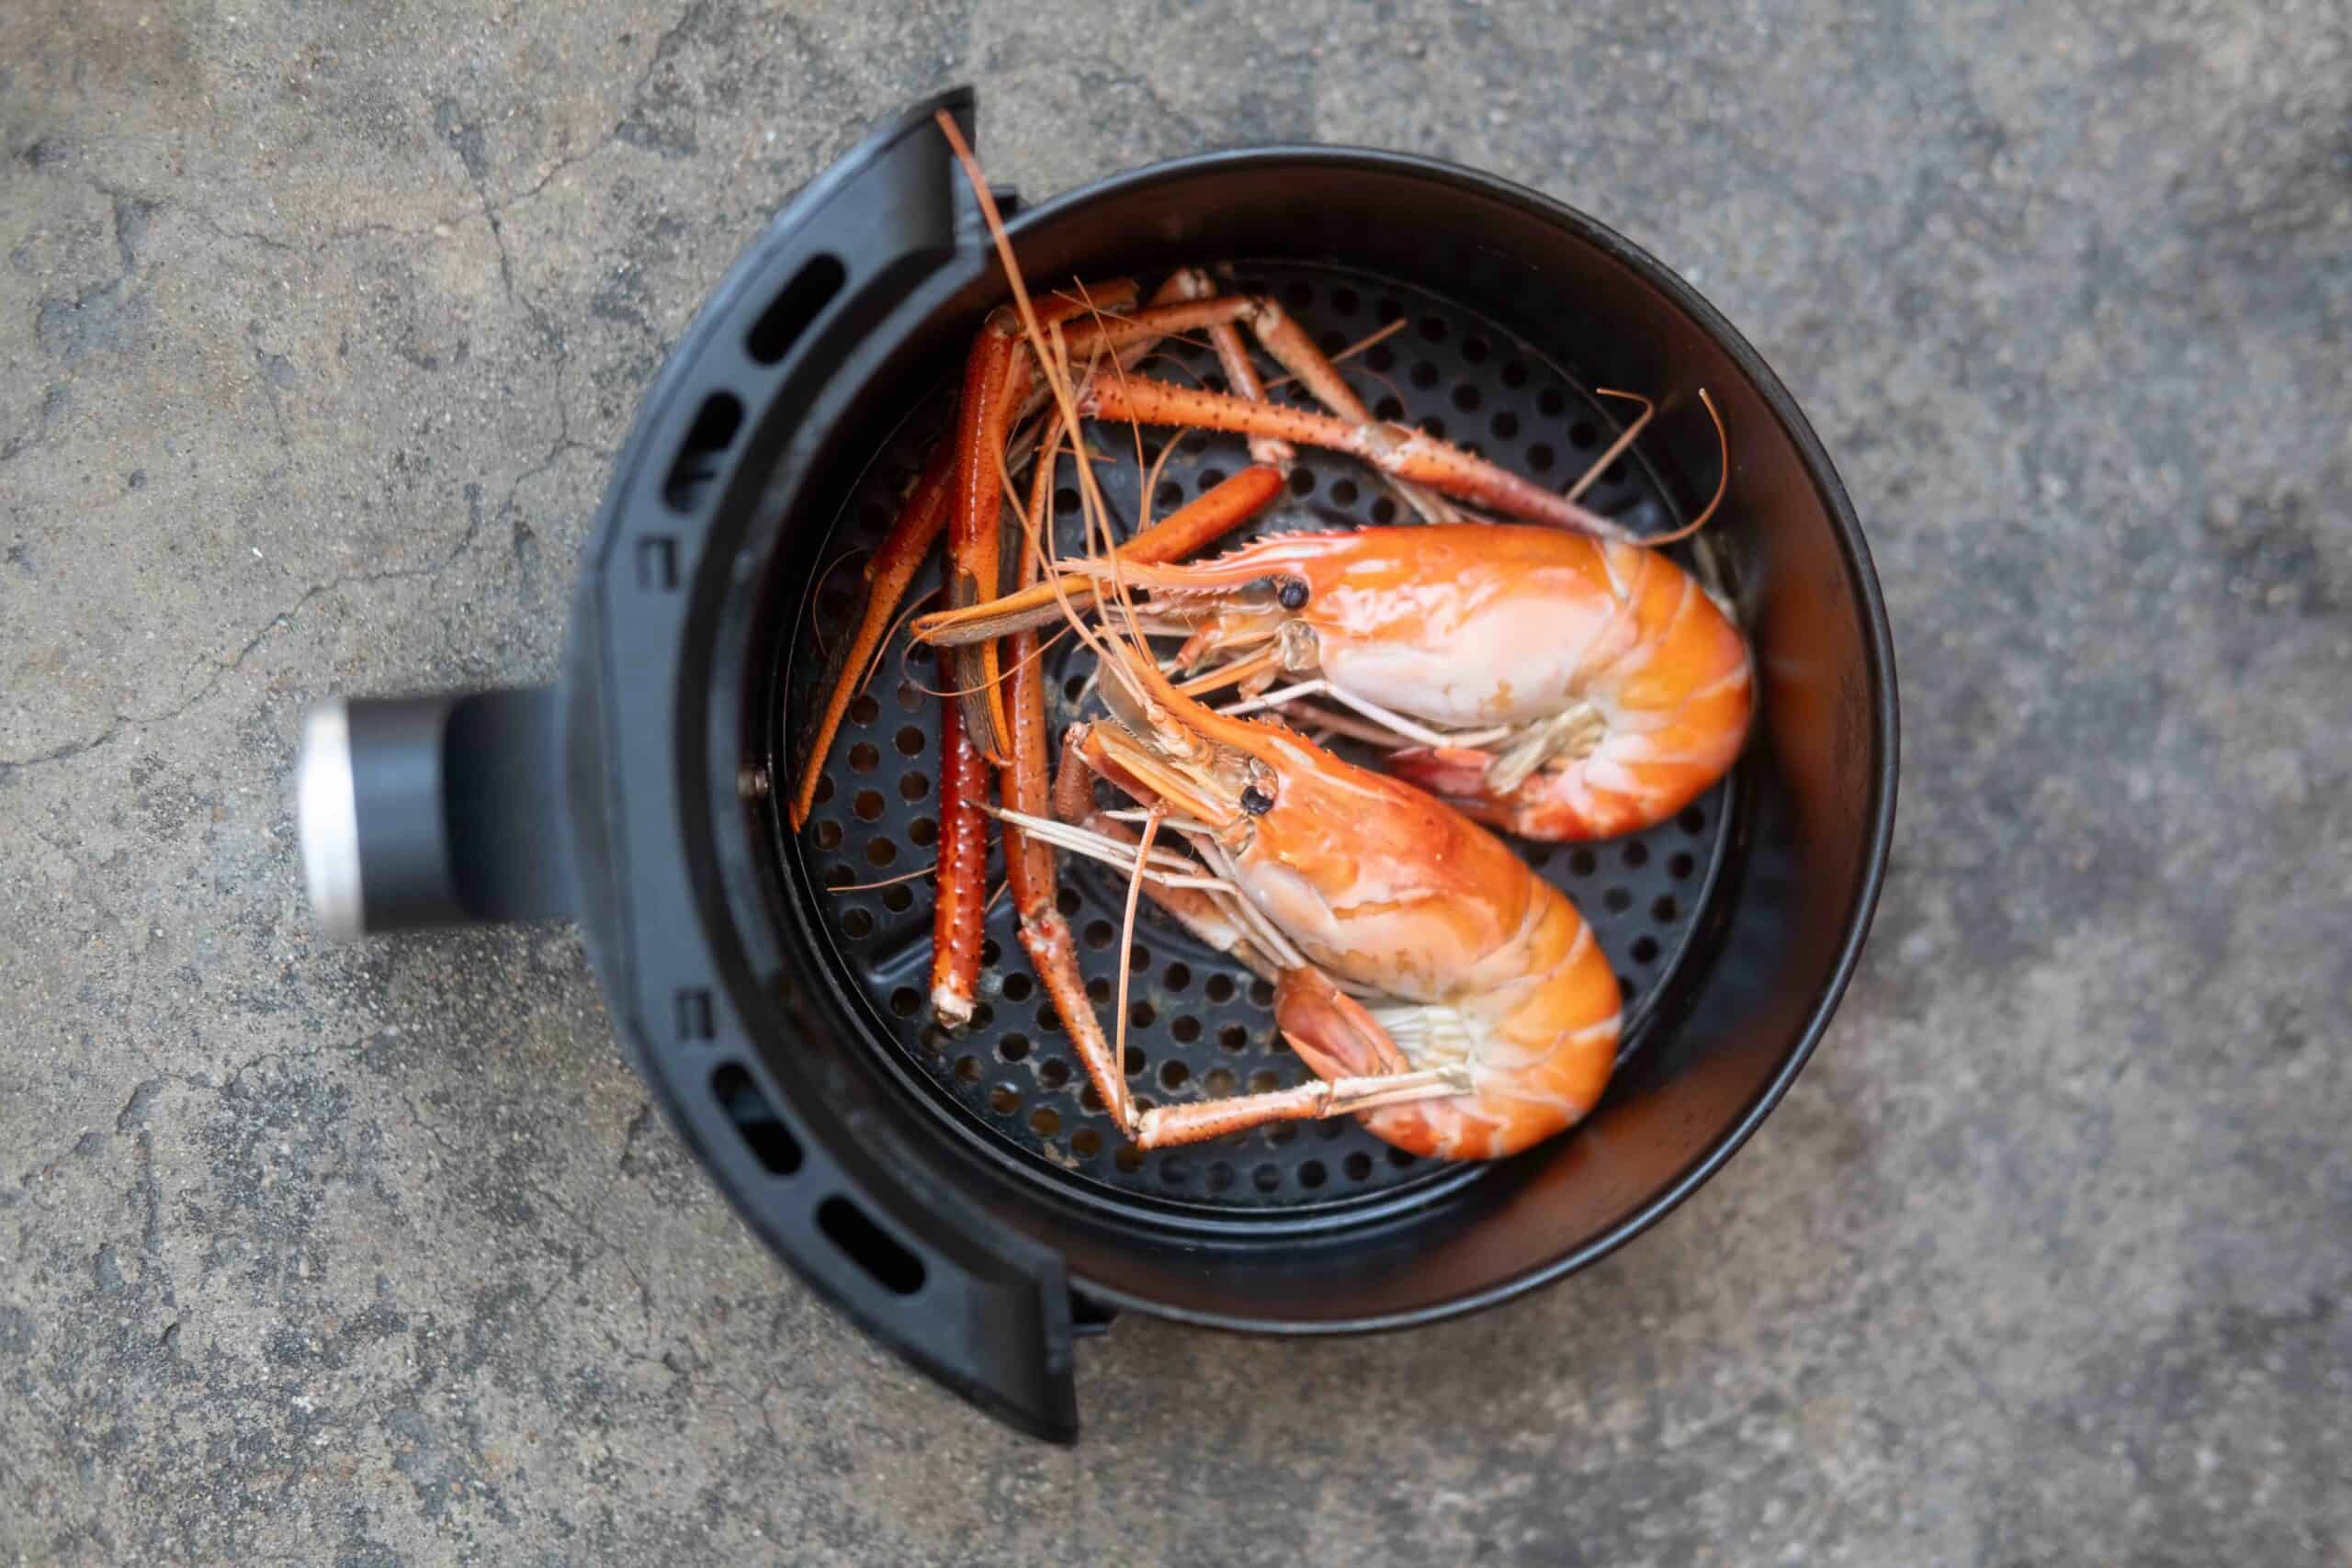 River shrimp cooked in black air fryer. Easy cooking in house concept